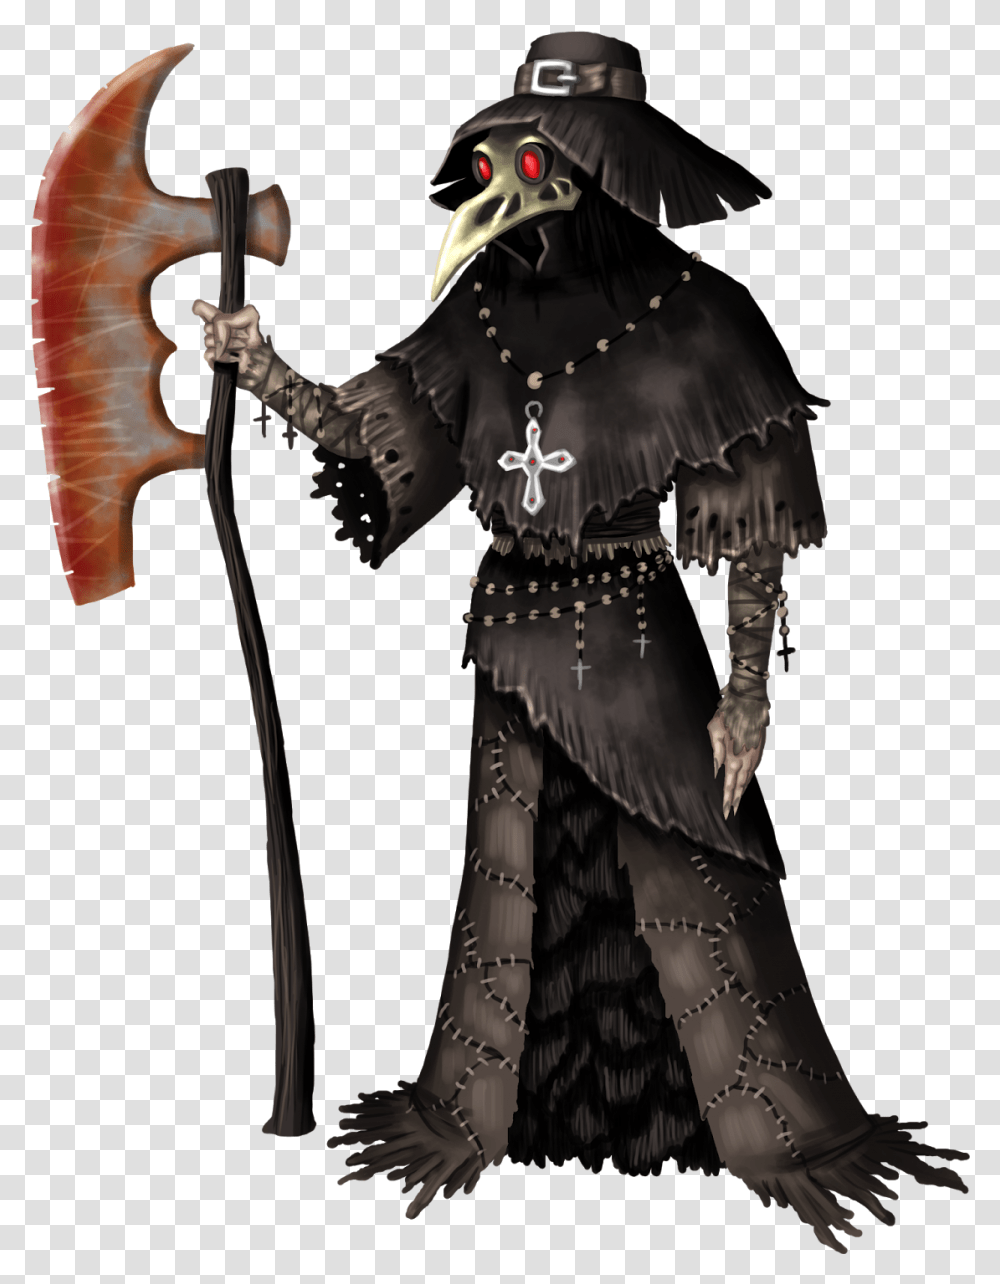 Design And Development Sketches For The Plague Doctor Plague Doctor, Person, Human, Costume Transparent Png